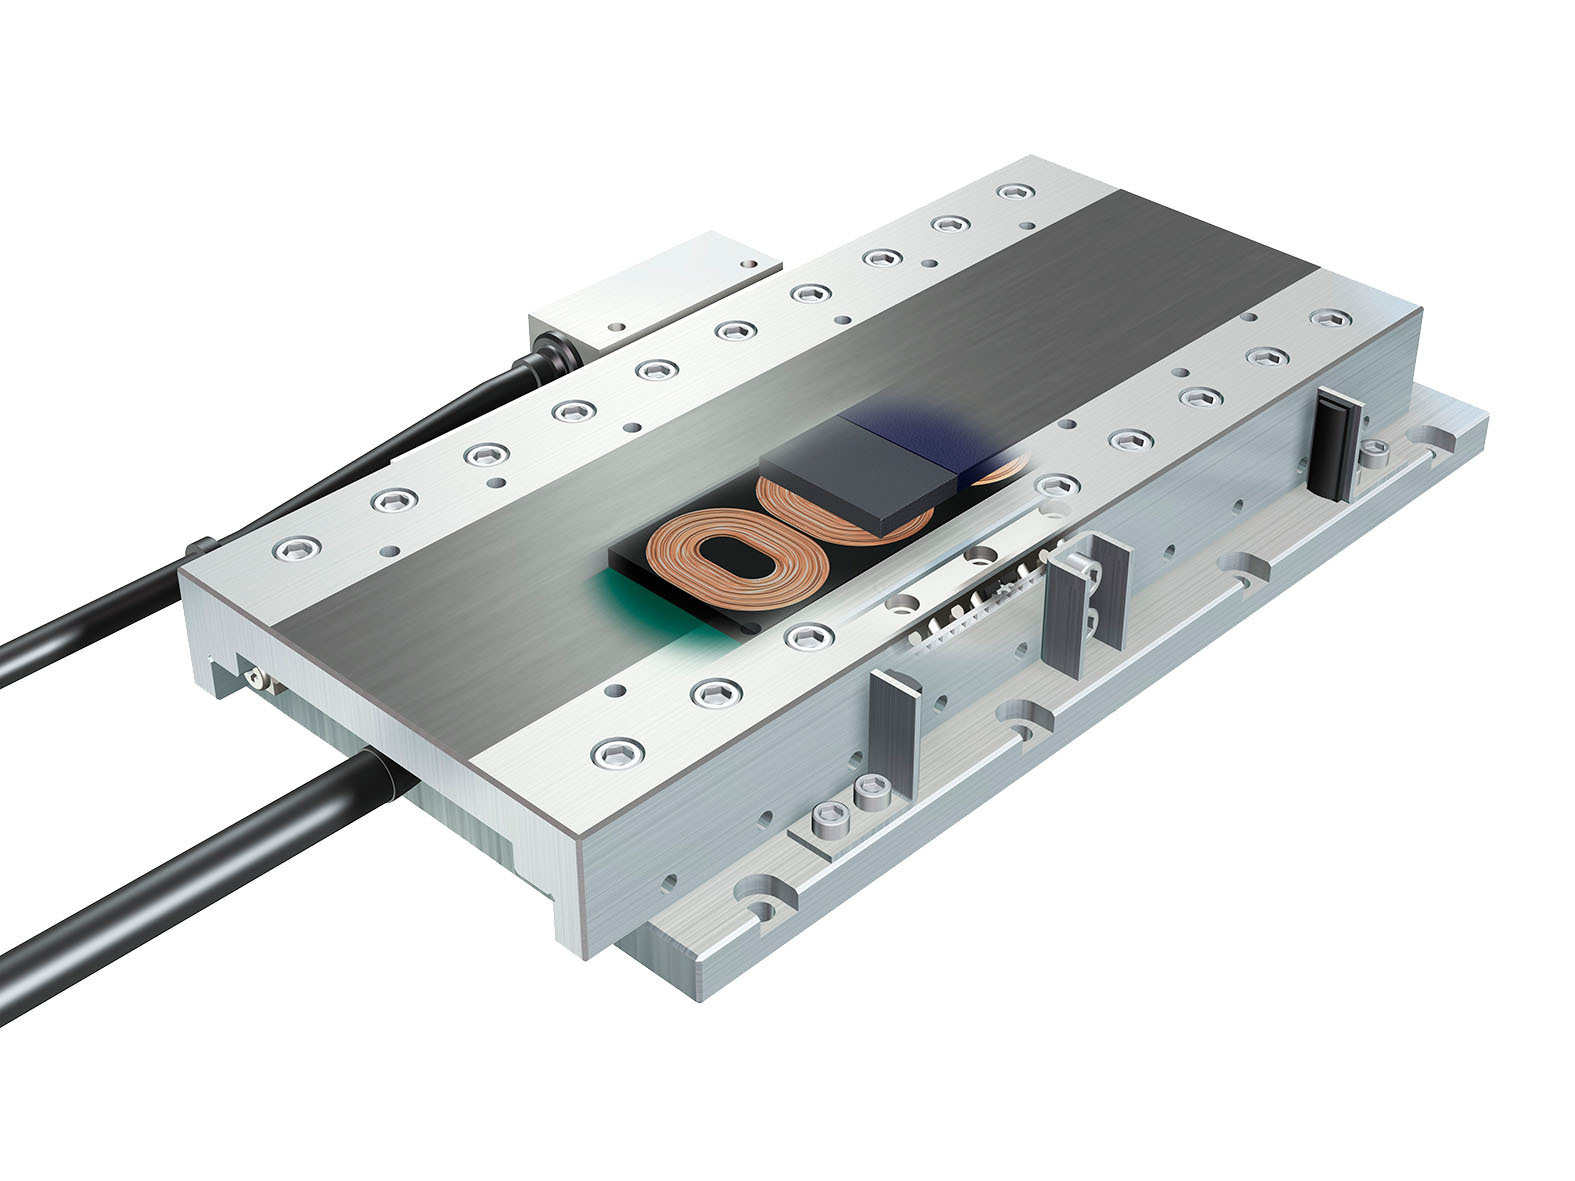 Linear Motor Positioning Tables Ensure Fast Acceleration and Deceleration for Dynamic Applications